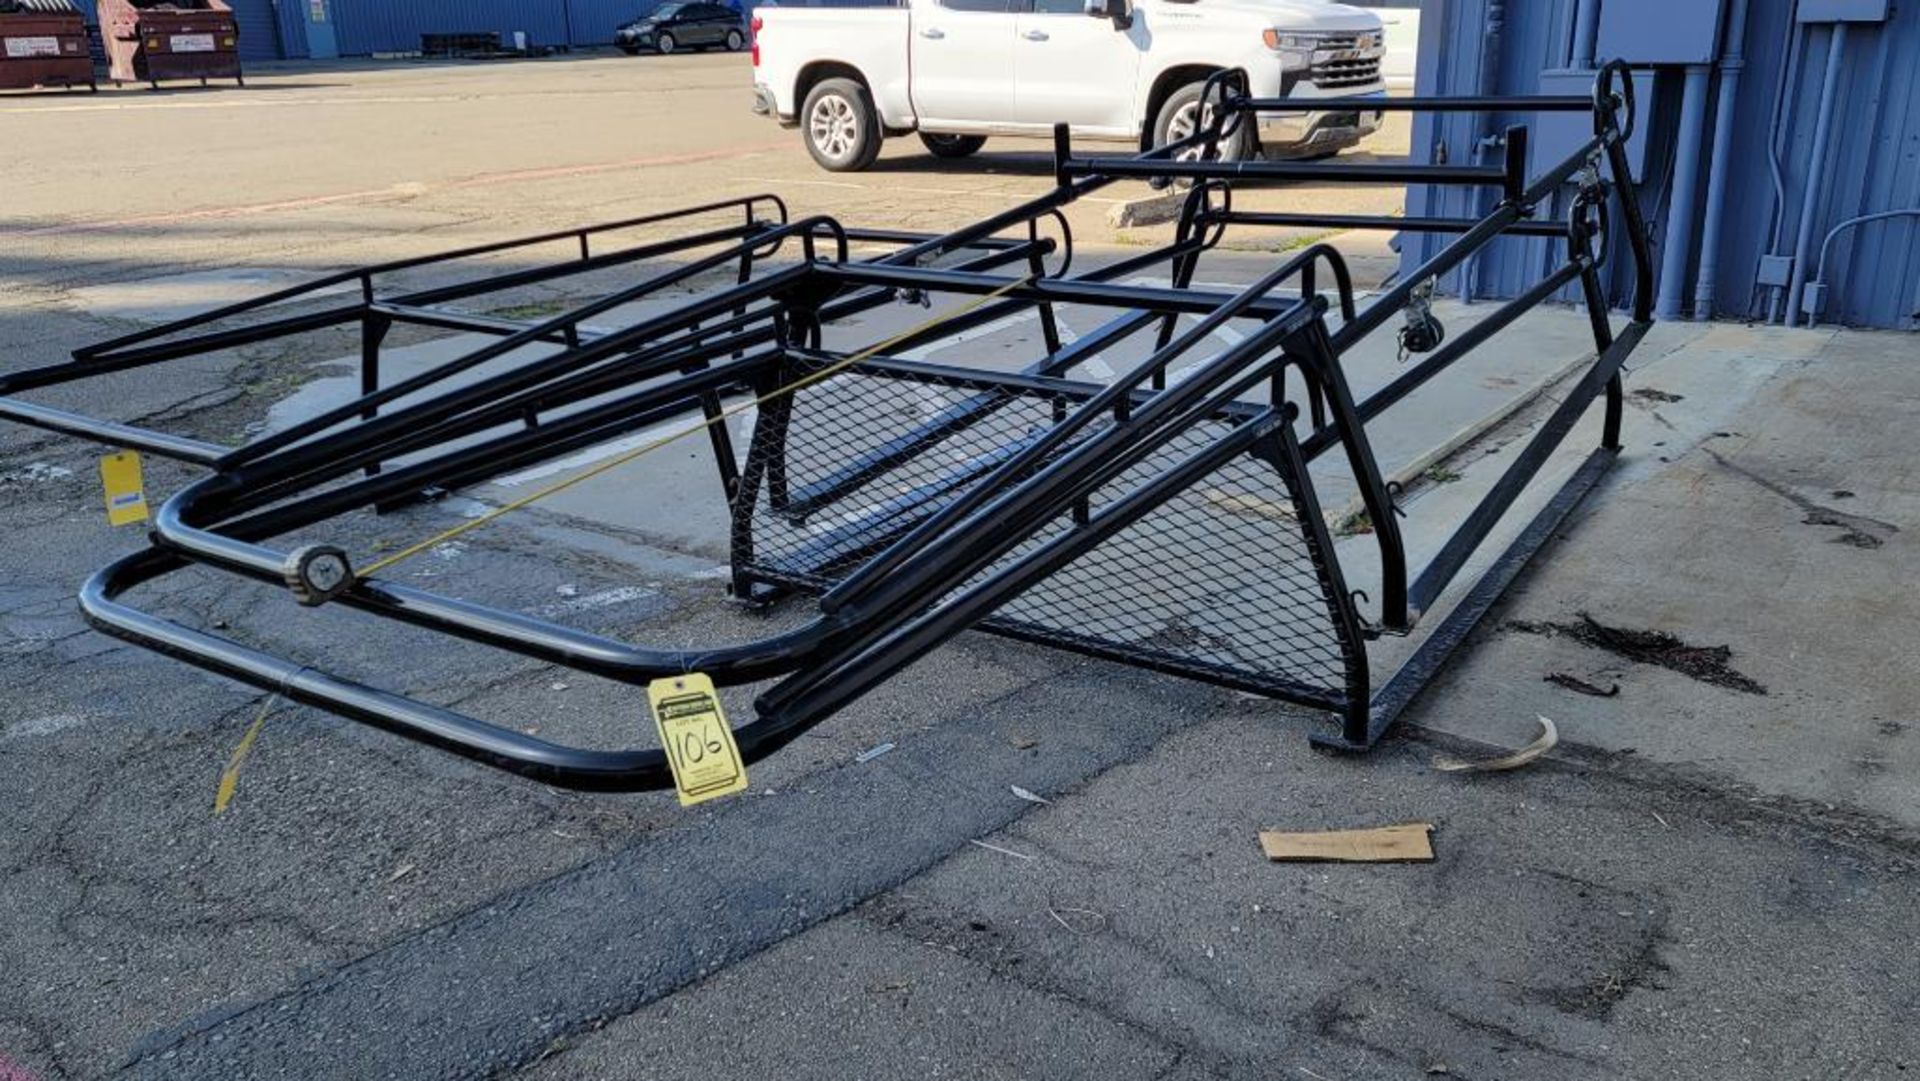 8' Bed Rackit Full Size Truck Utility Rack (This is The Bottom One w/ The Mesh Window Guard)